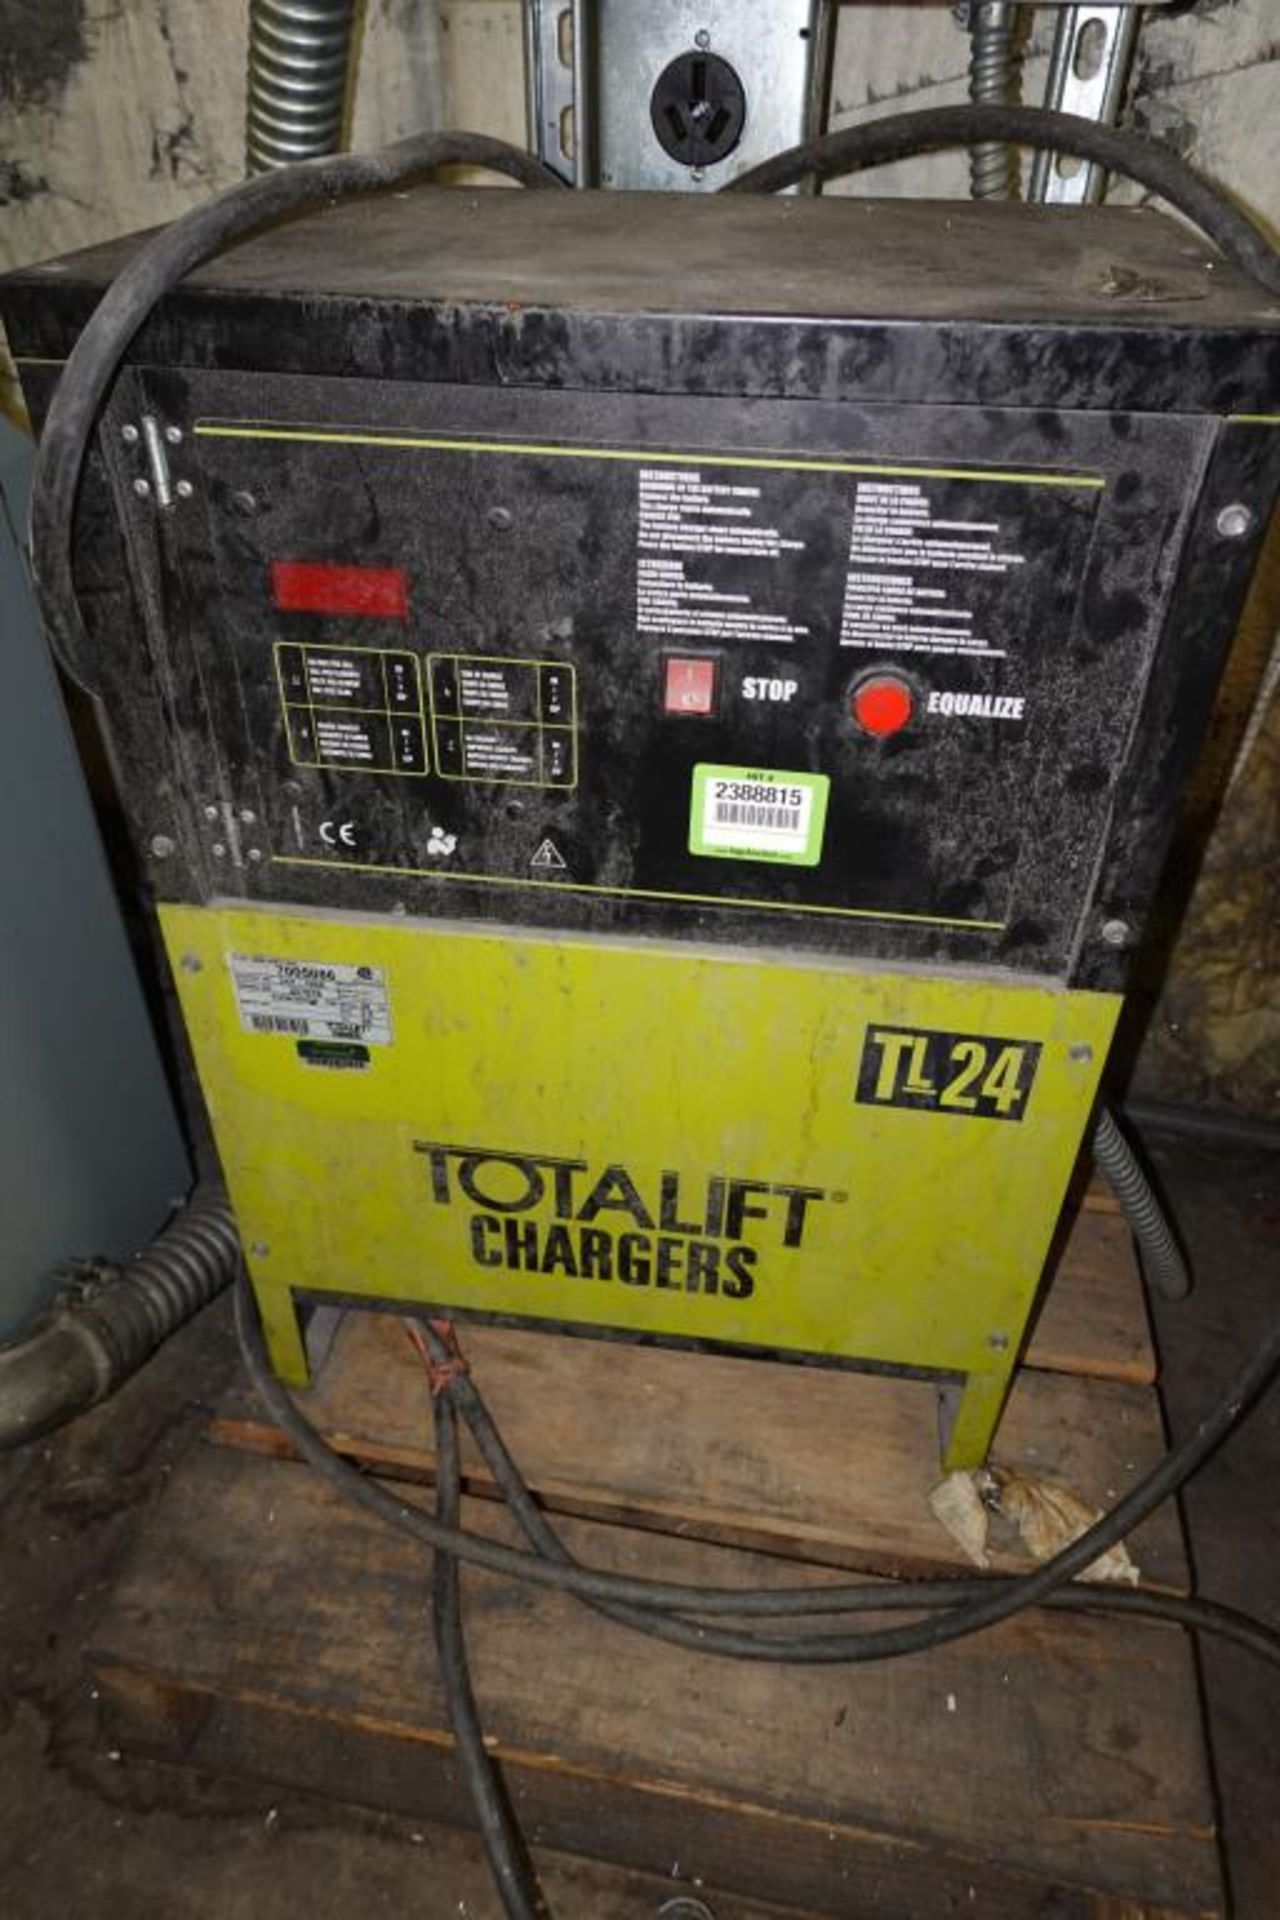 Totalift TL24 24-Volt Electric Lift Battery Charger